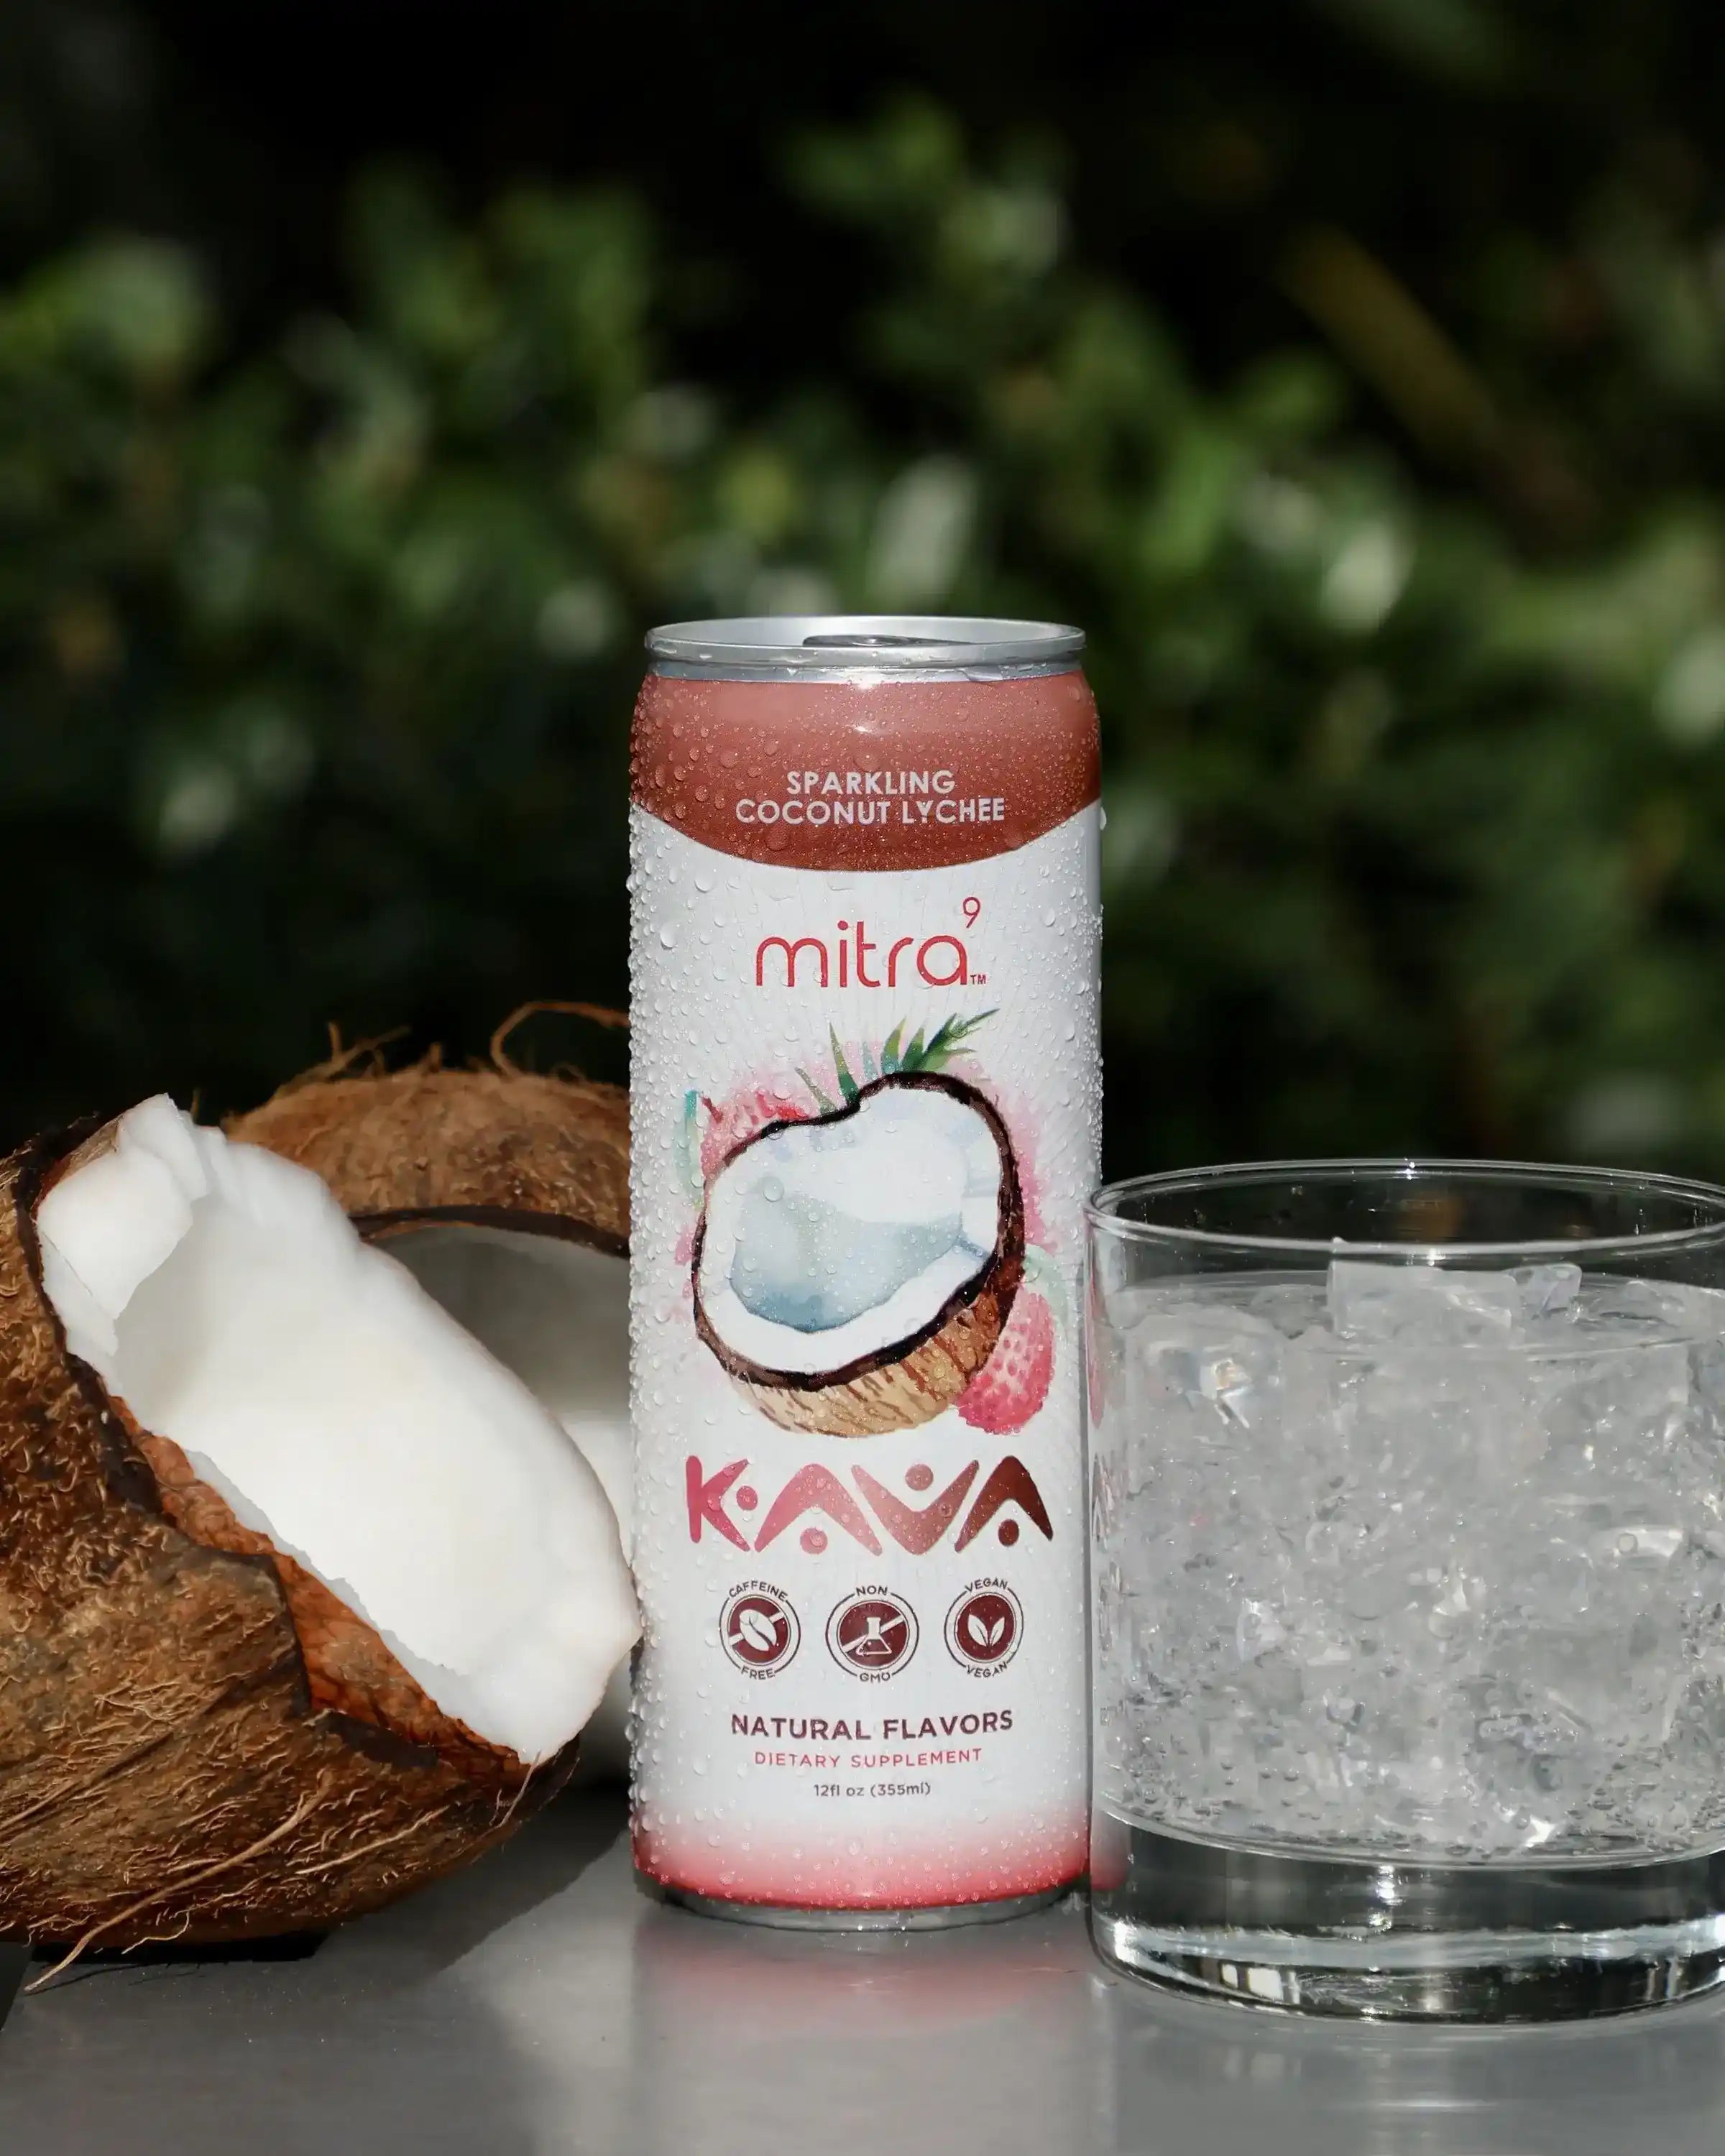 coconut lychee kava drink in can Mitra9 cava